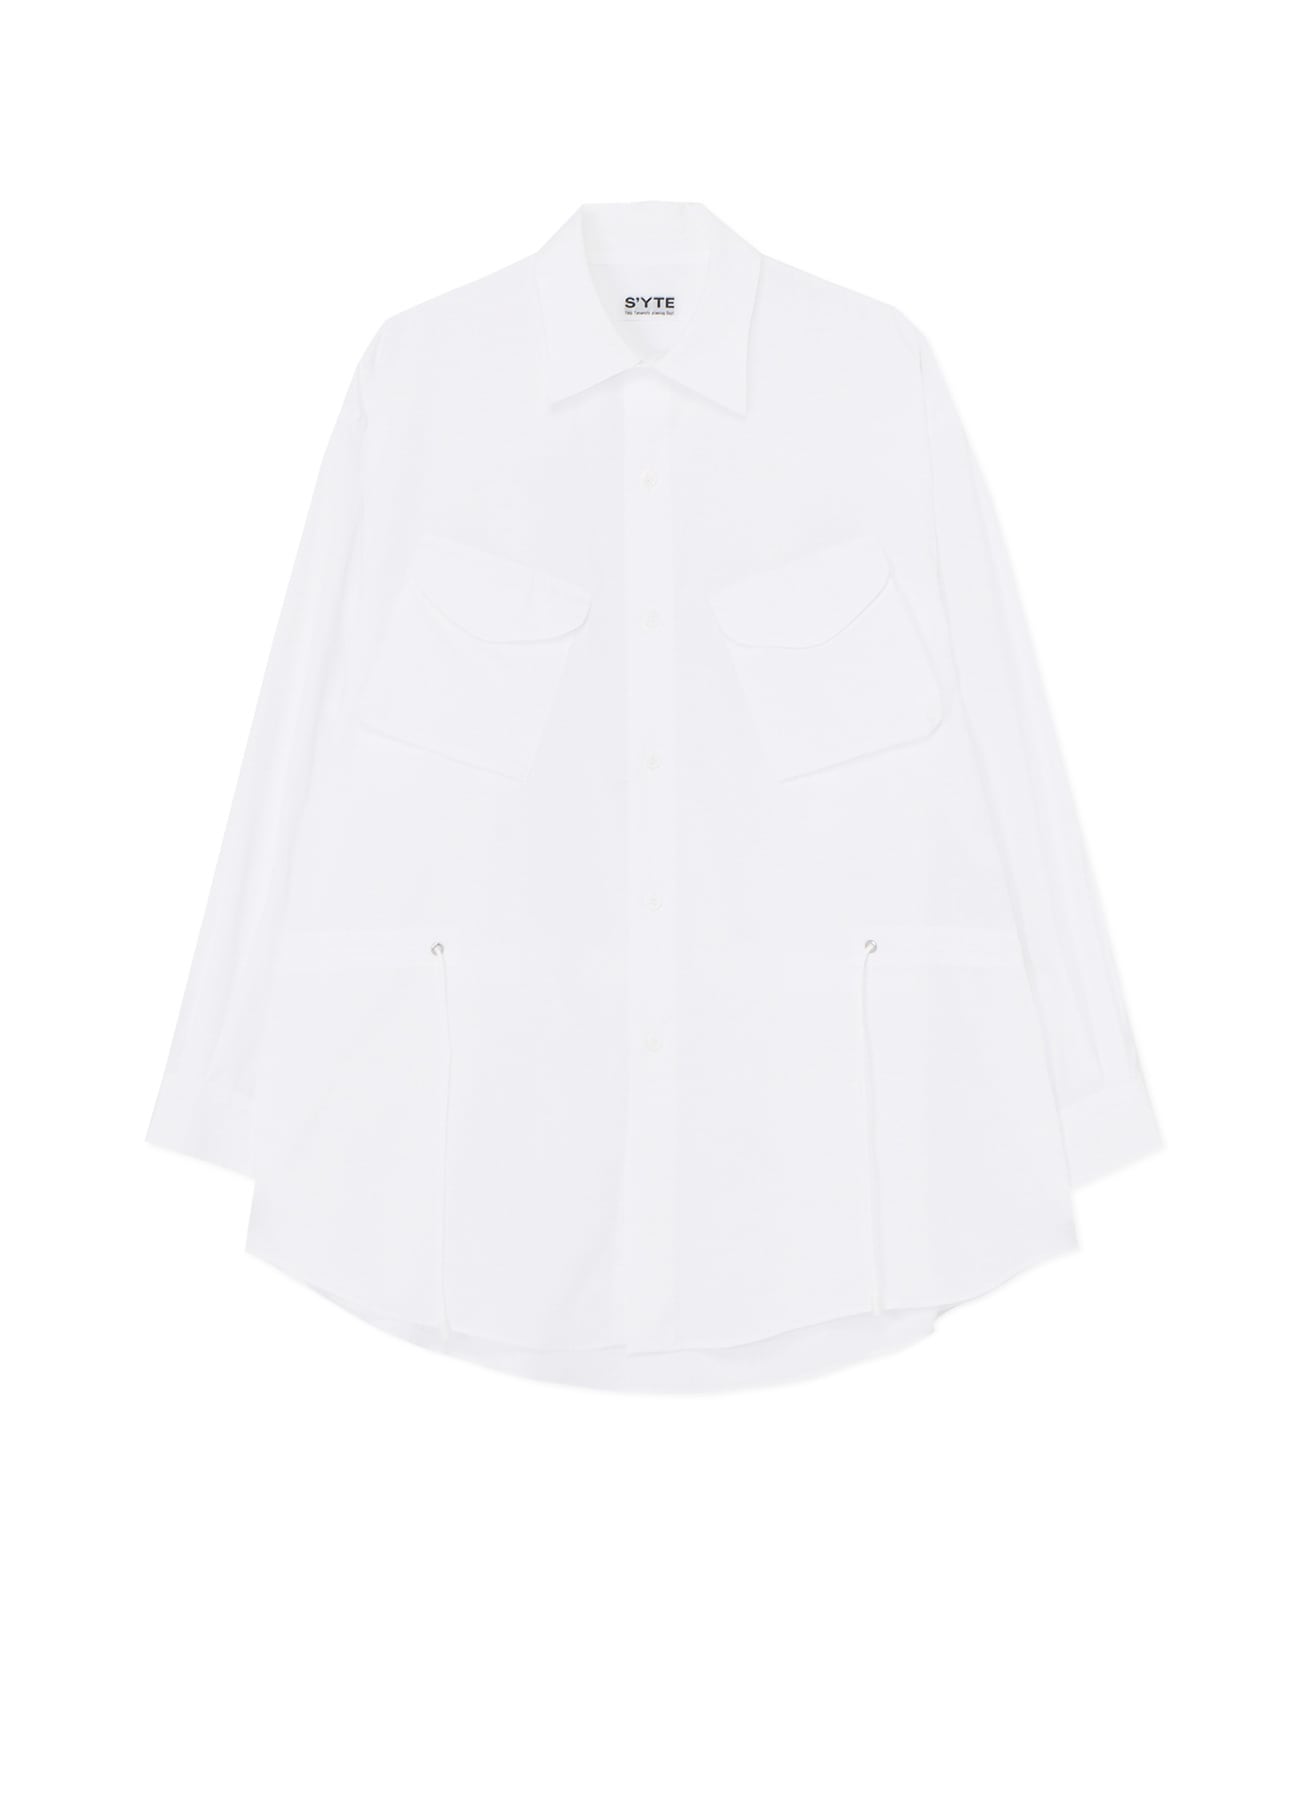 COTTON BROAD CLOTH MODS COAT-INSPIRED SHIRT